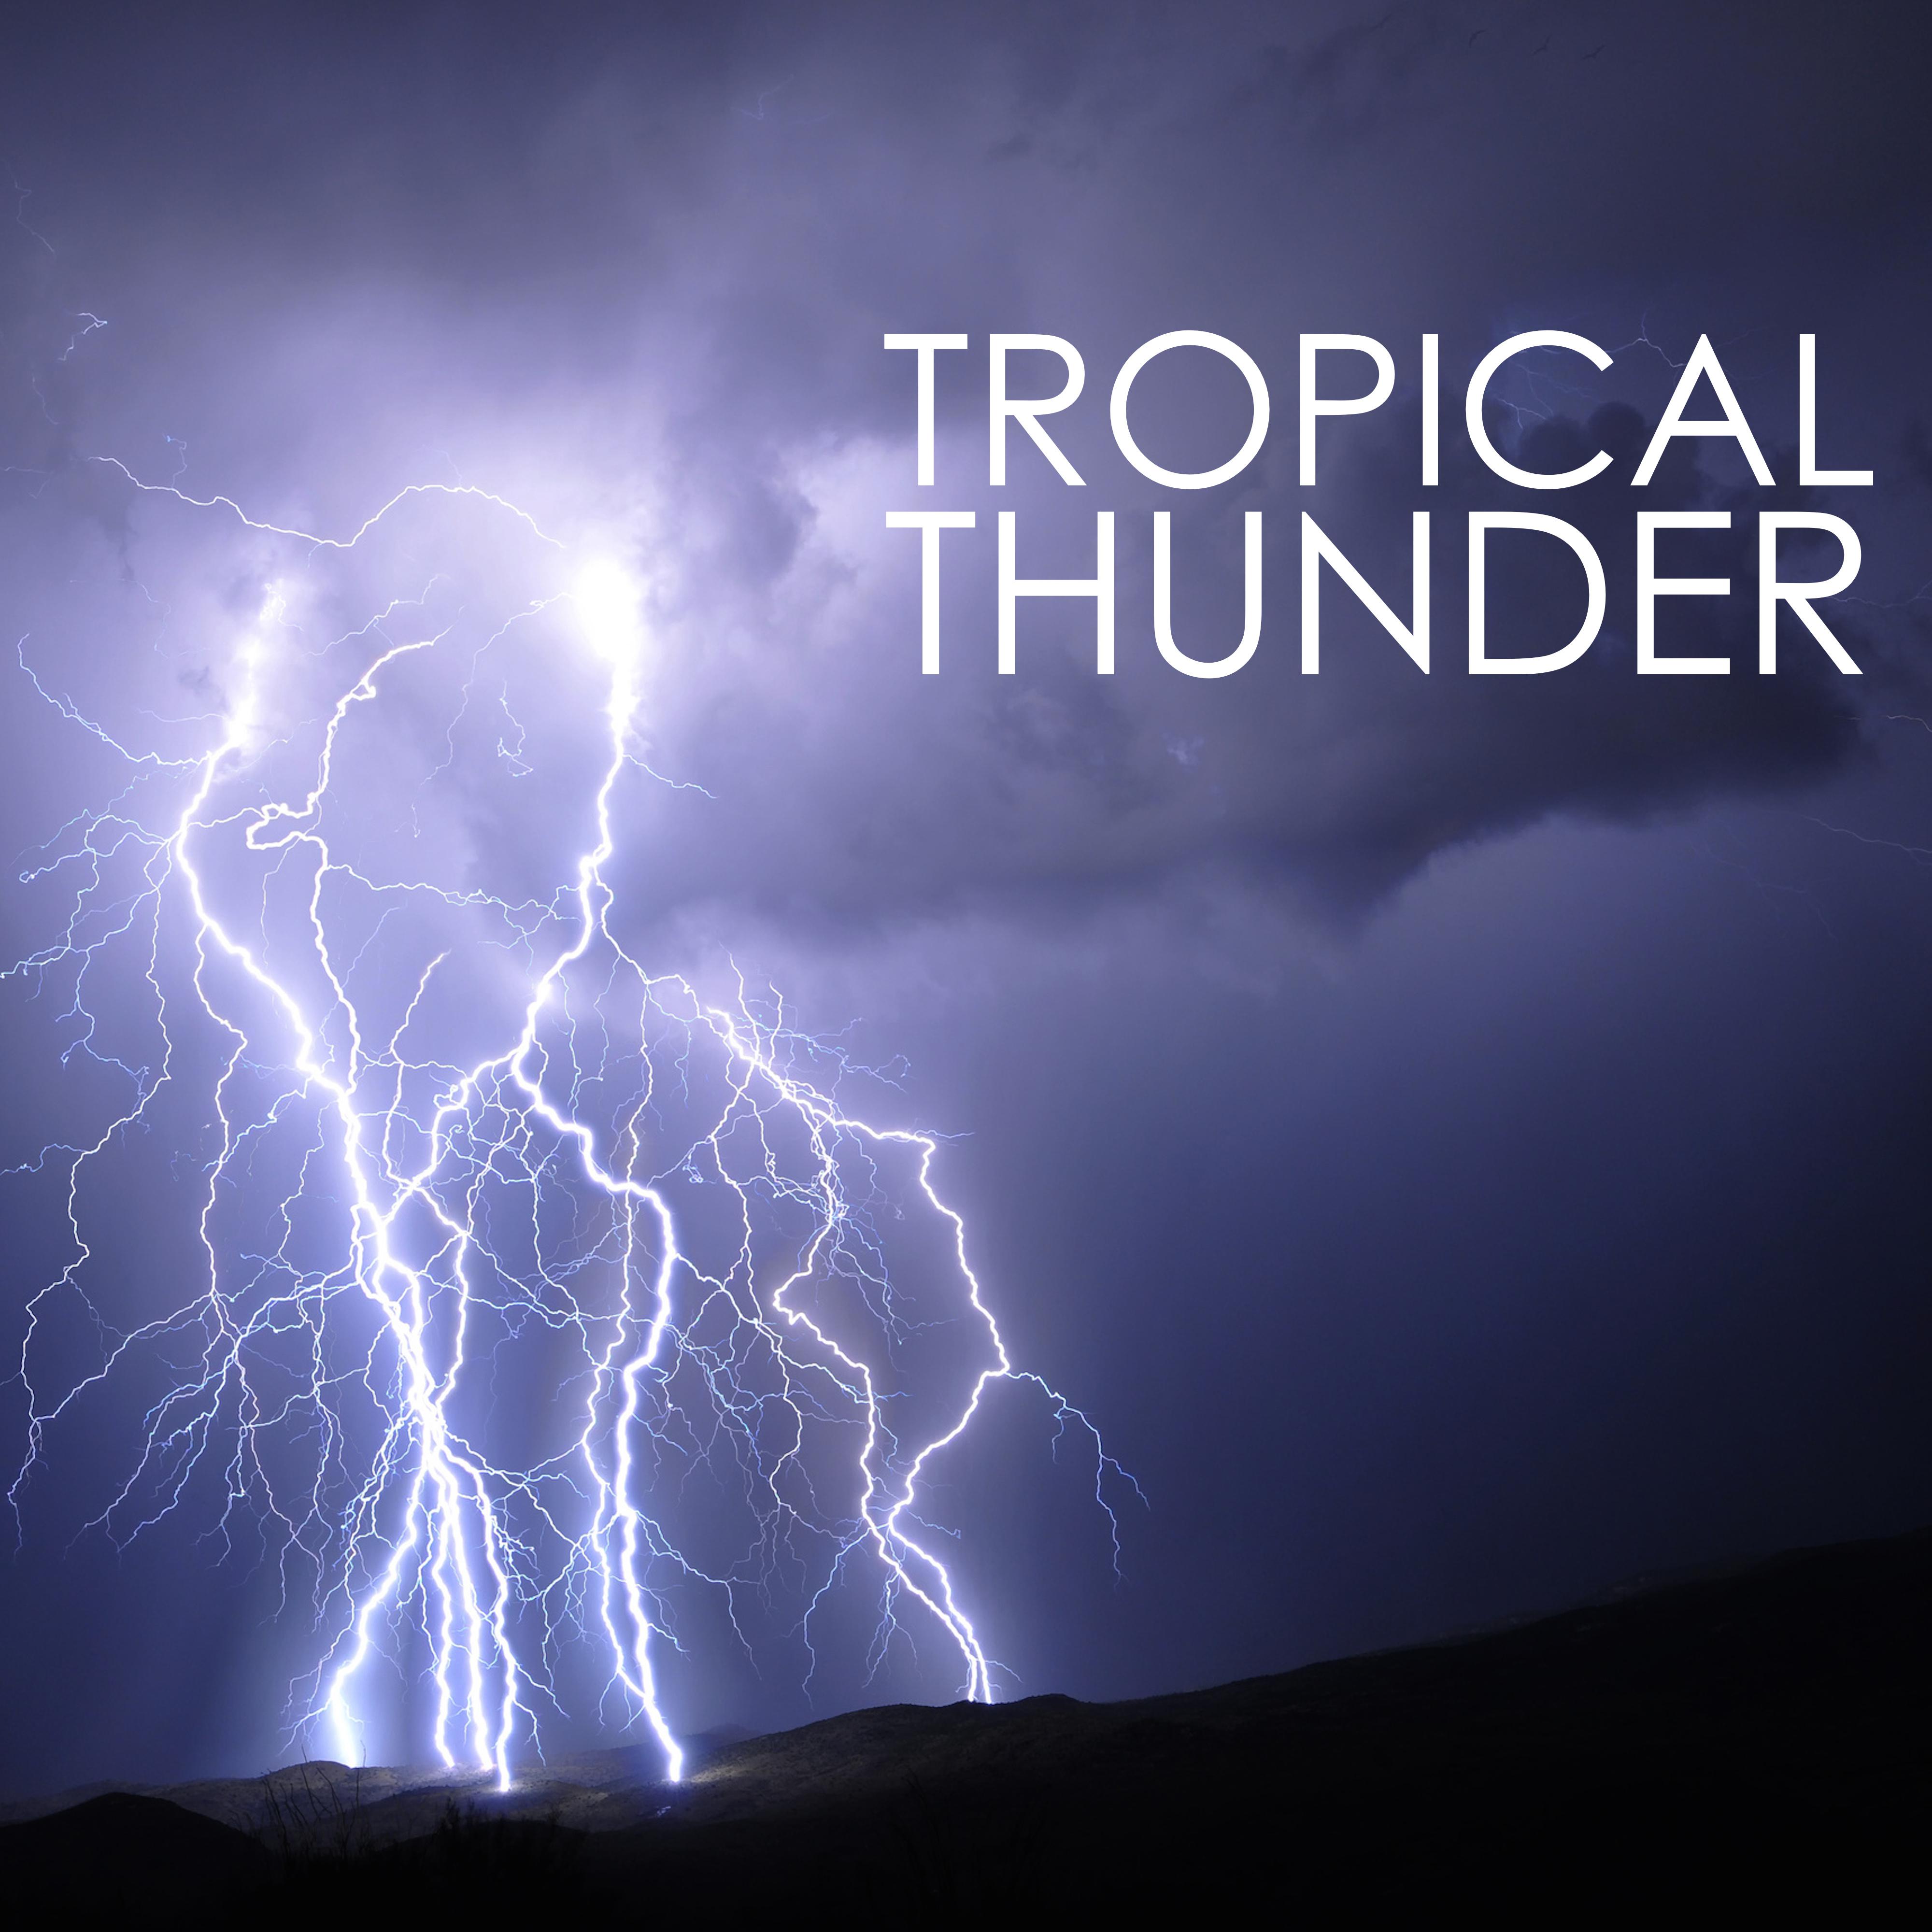 Tropical Thunder - New Age Music with Nature Sounds of Rain and Thunderstorm Sounds